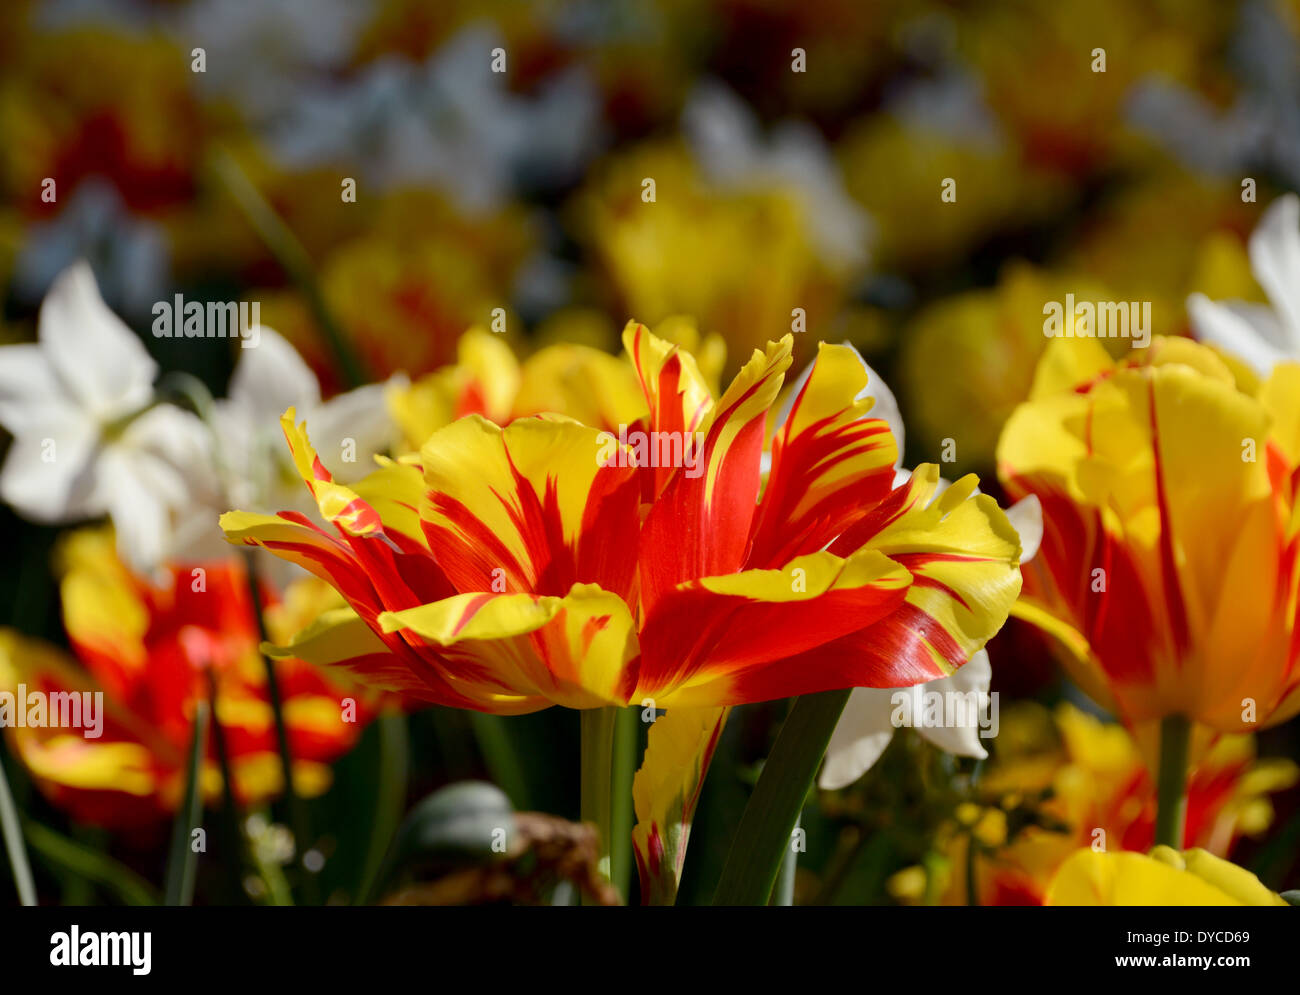 Flower bed full of colorful red and yellow Monsella tulips in abstract Stock Photo